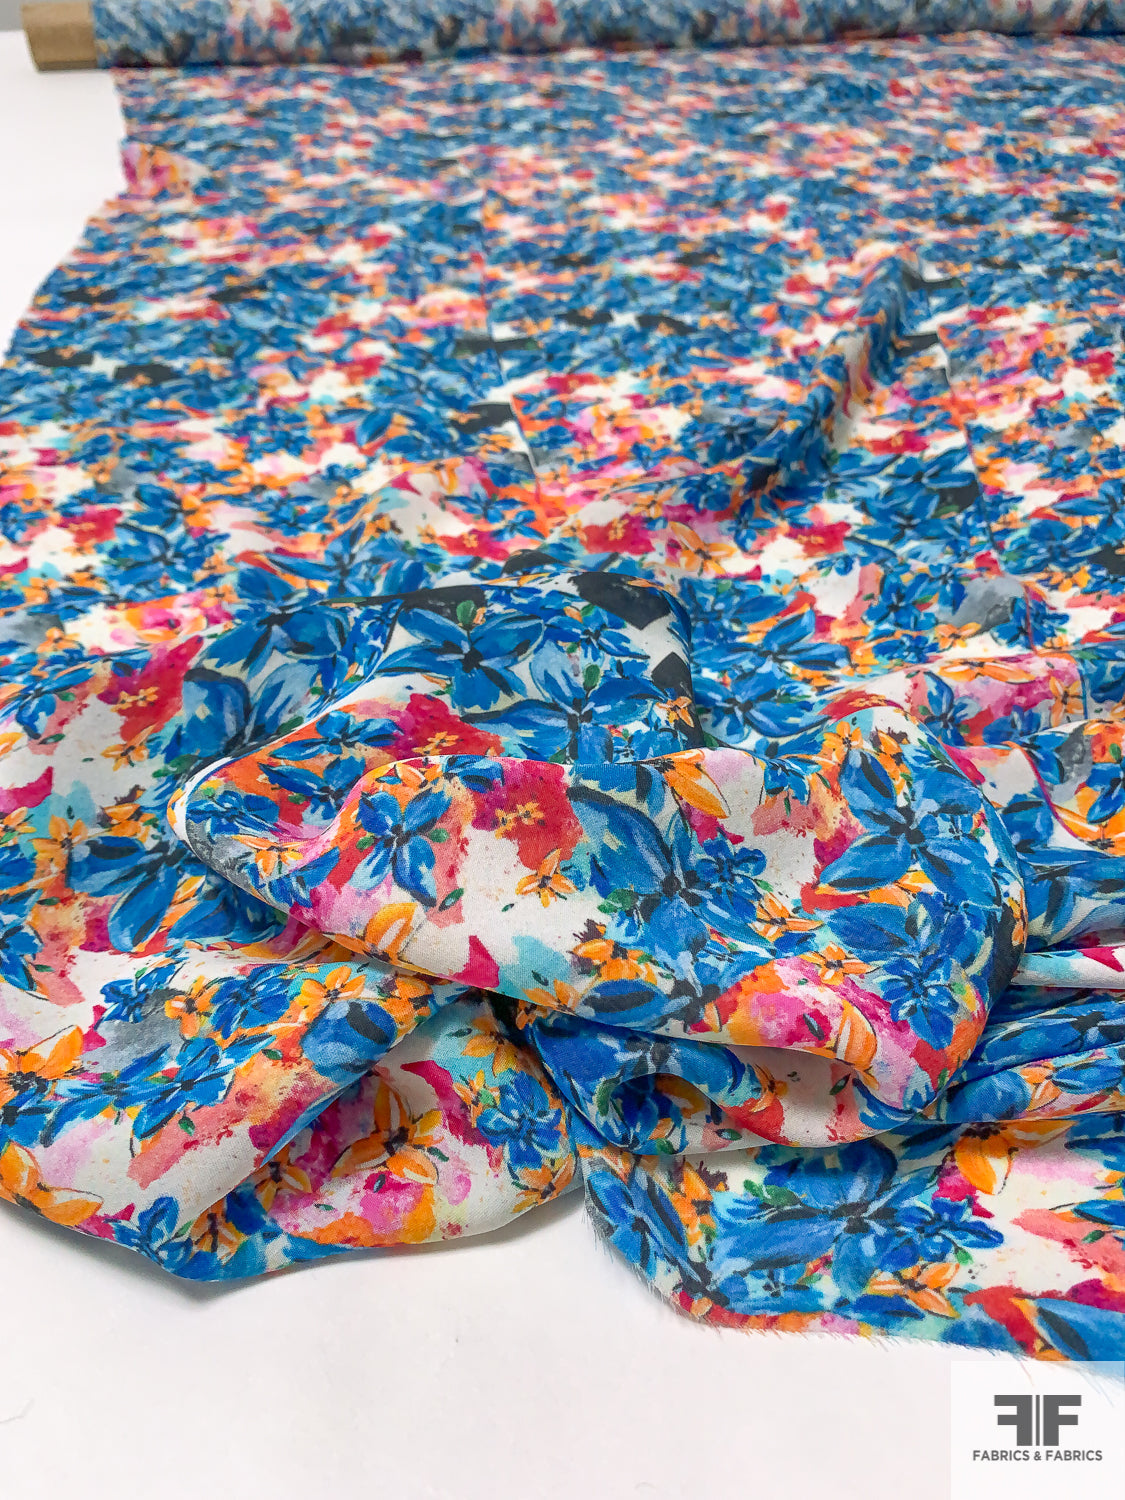 Floral and Sectioned Printed Silk Georgette - Ocean Blue / Magenta / Bright Orange